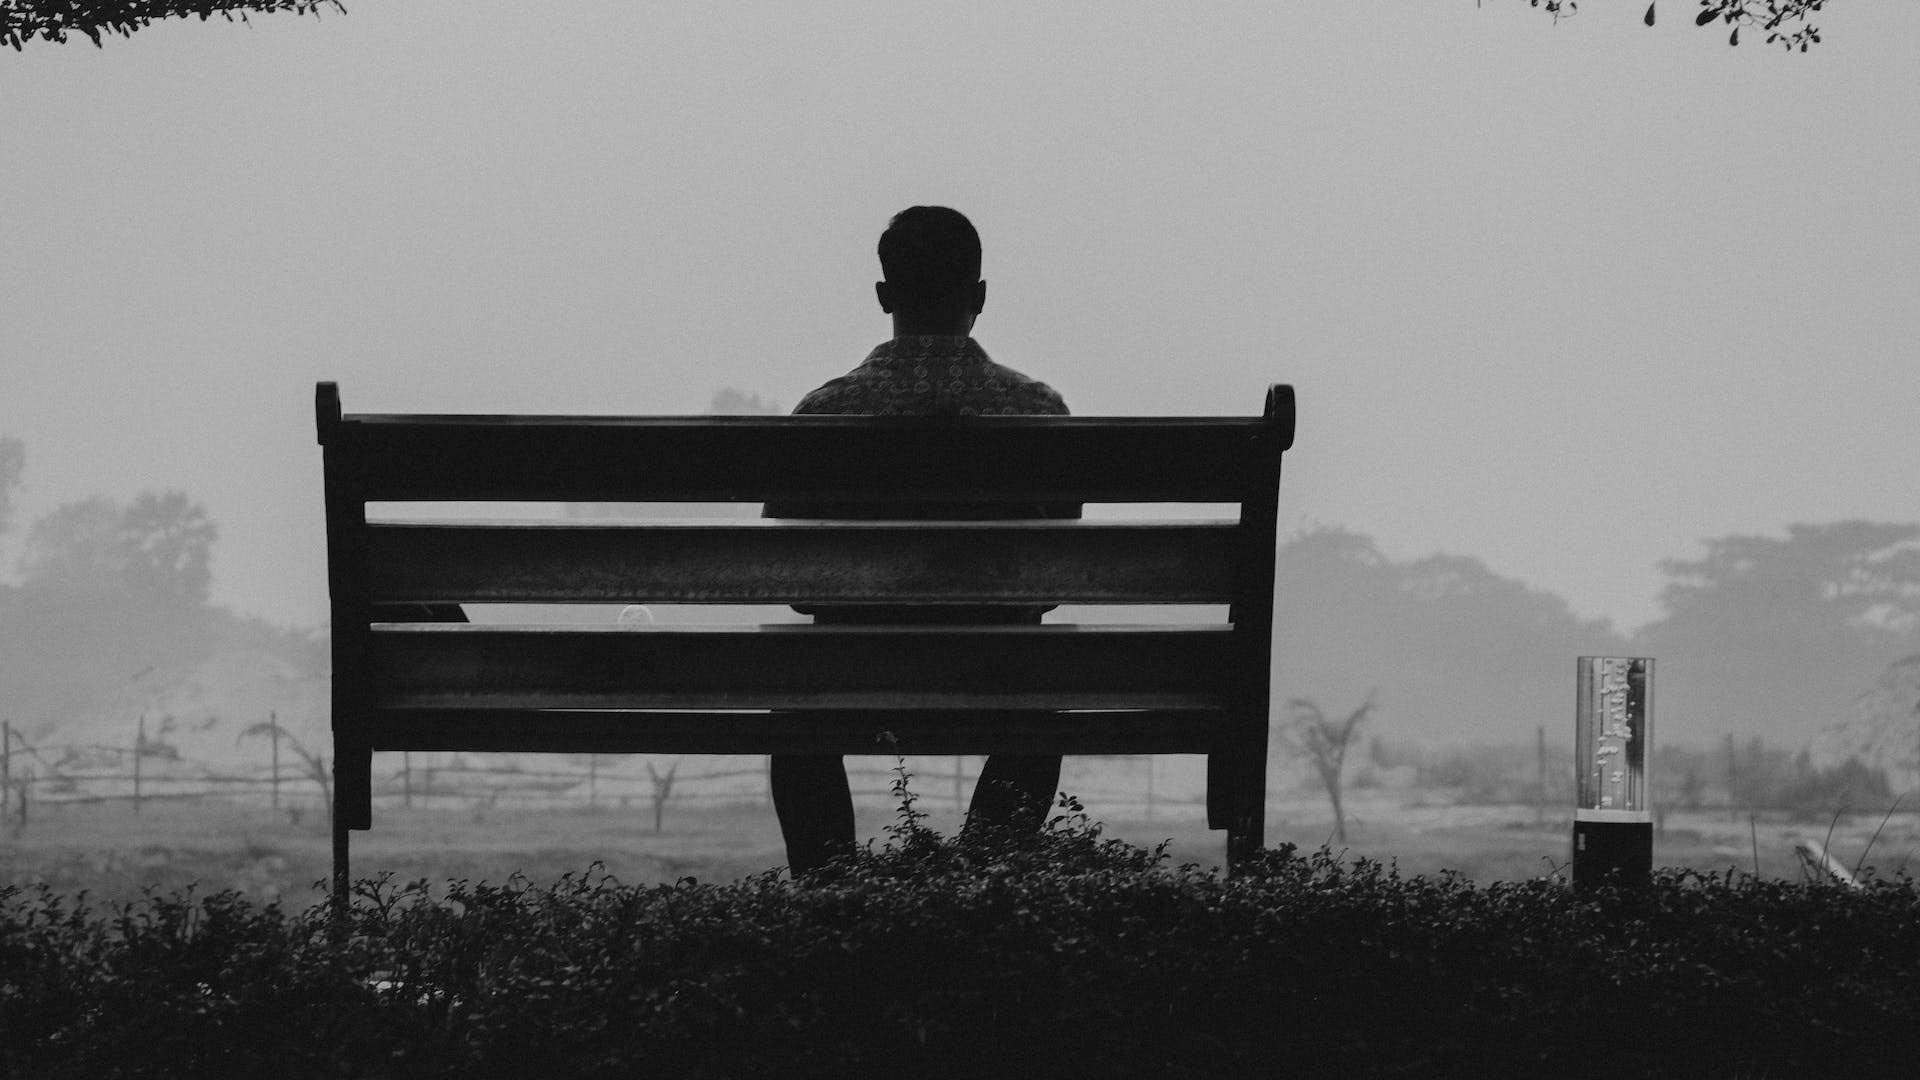 Researchers note being alone is not the same as feeling lonely.